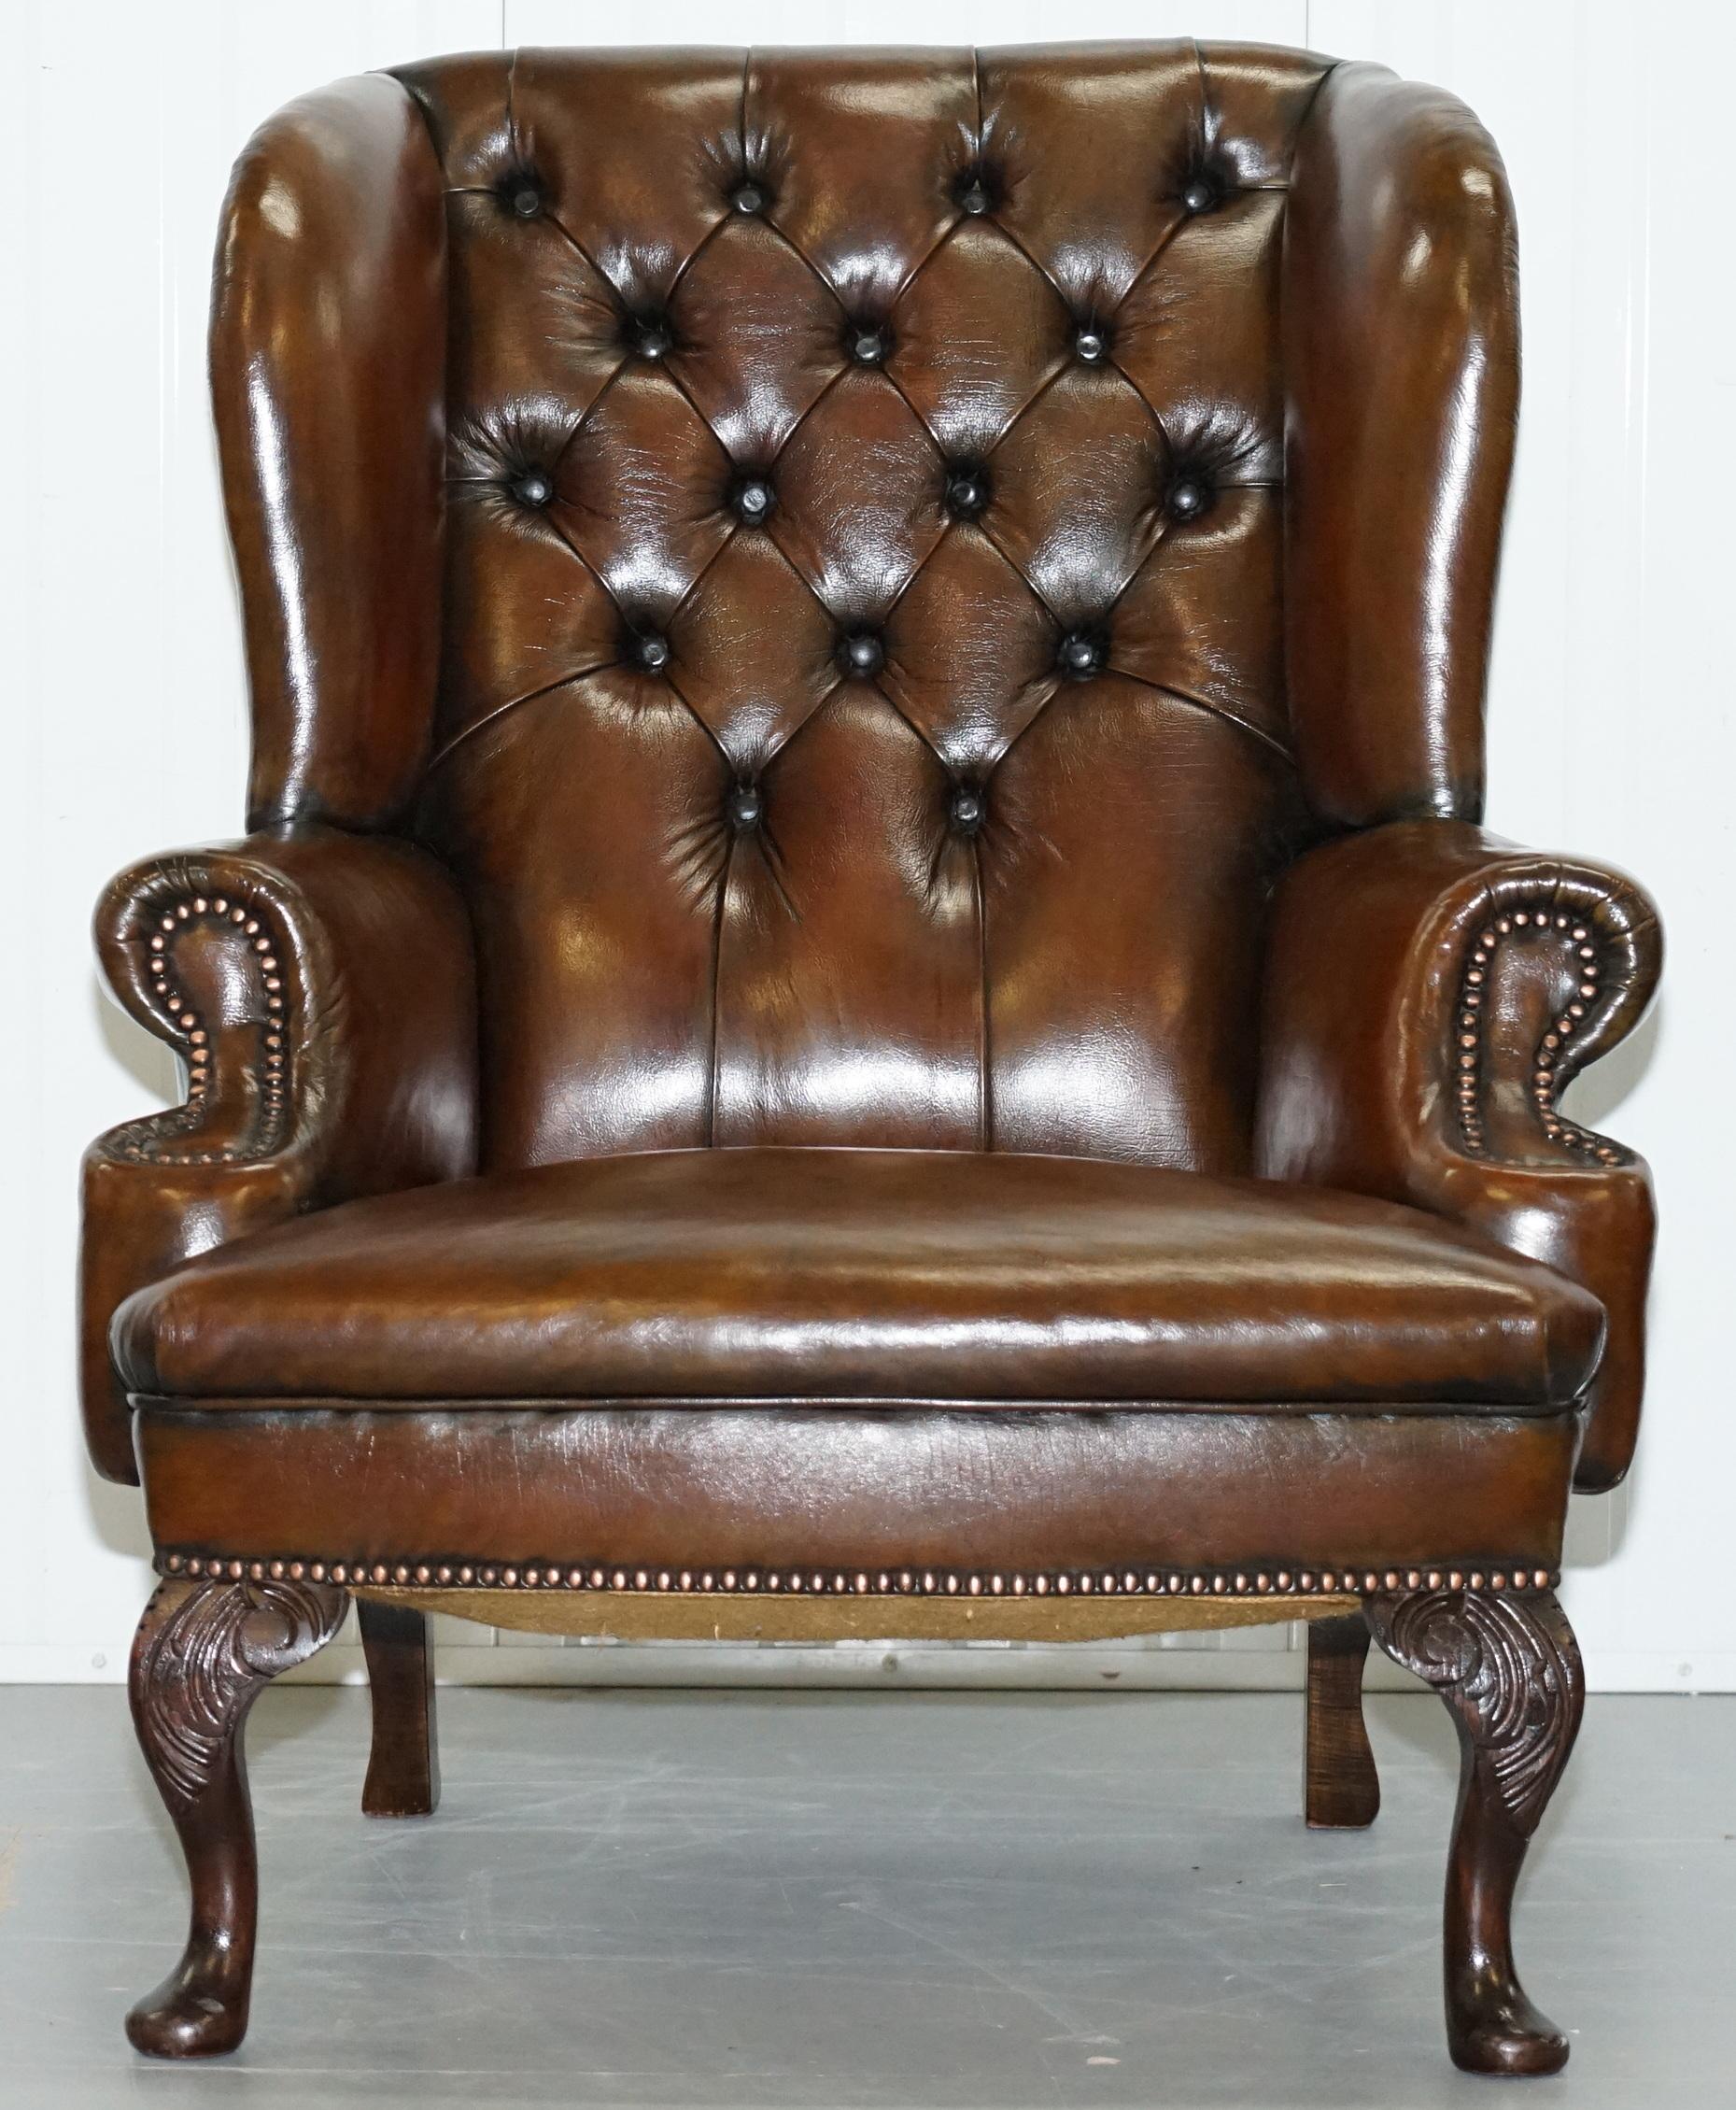 We are delighted to offer for sale this stunning pair of fully restored cigar brown leather Chesterfield wingback armchairs with hand-carved Acanthus leaf cabriolet legs 

Please note the delivery fee listed is just a guide, it covers within the